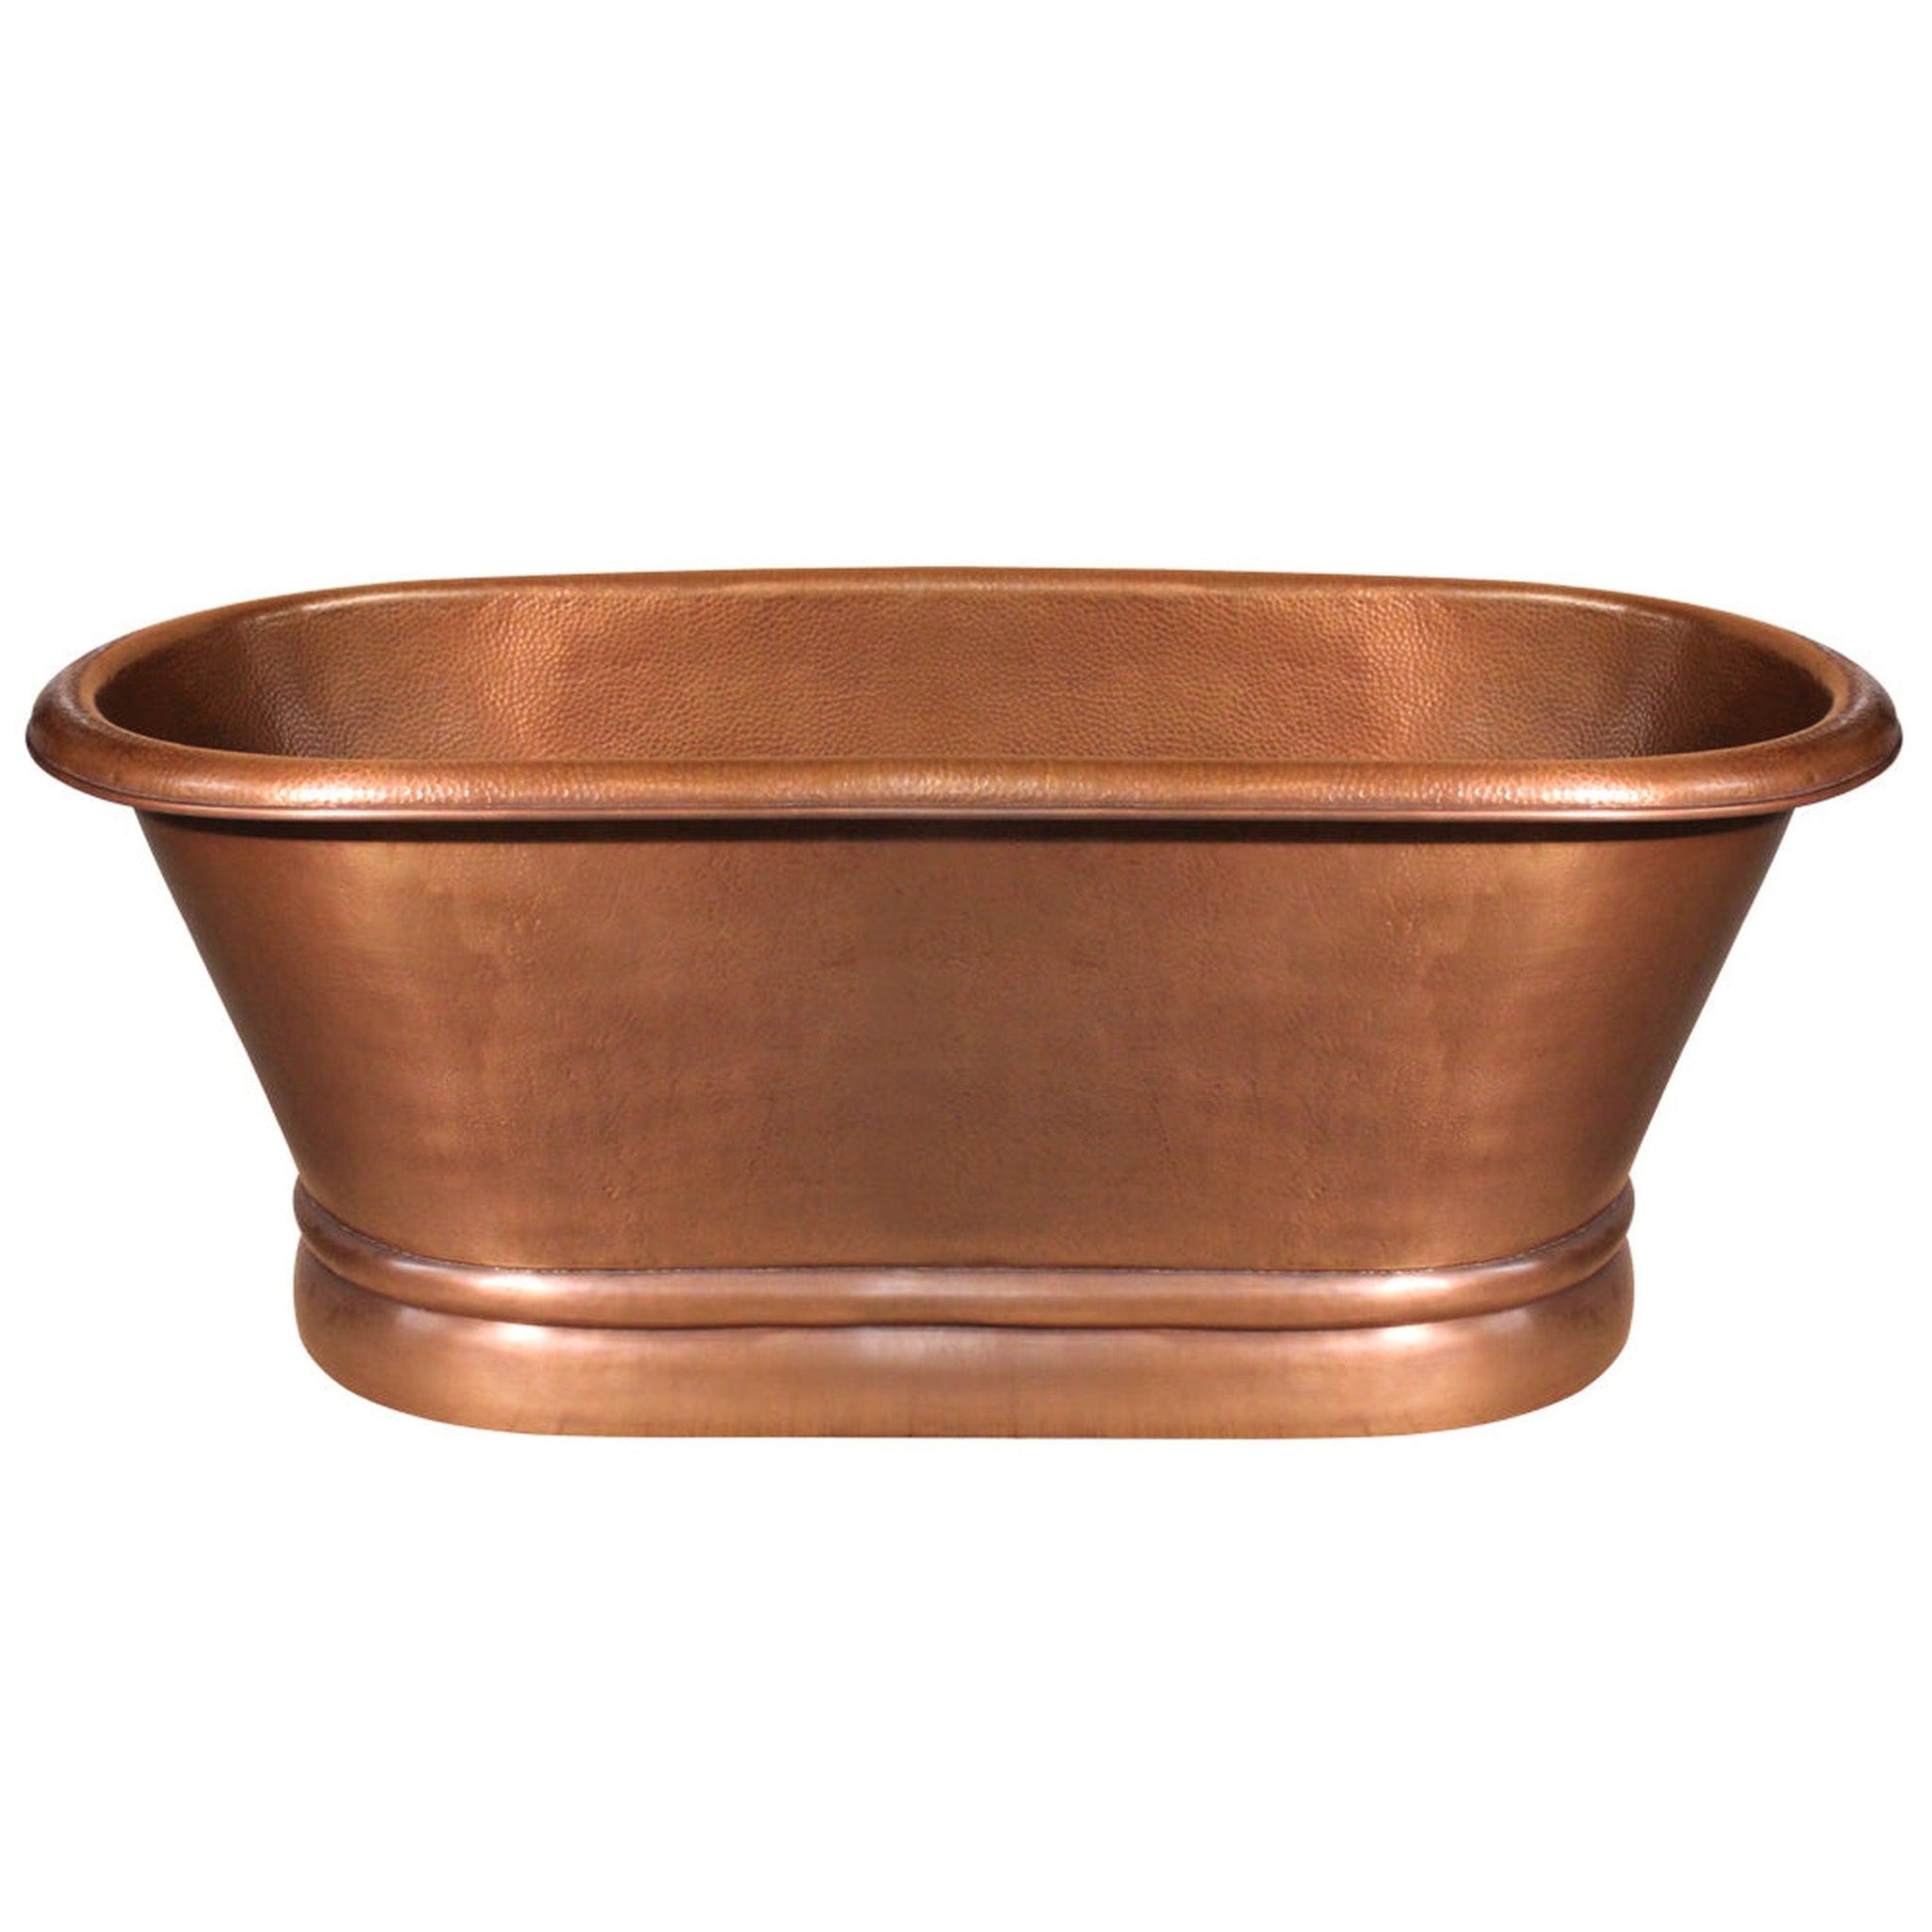 Whitehaus Bathhaus WHCT-1002-OCH Hammered Copper Freestanding Handmade Double Ended Bathtub With Hammered Exterior